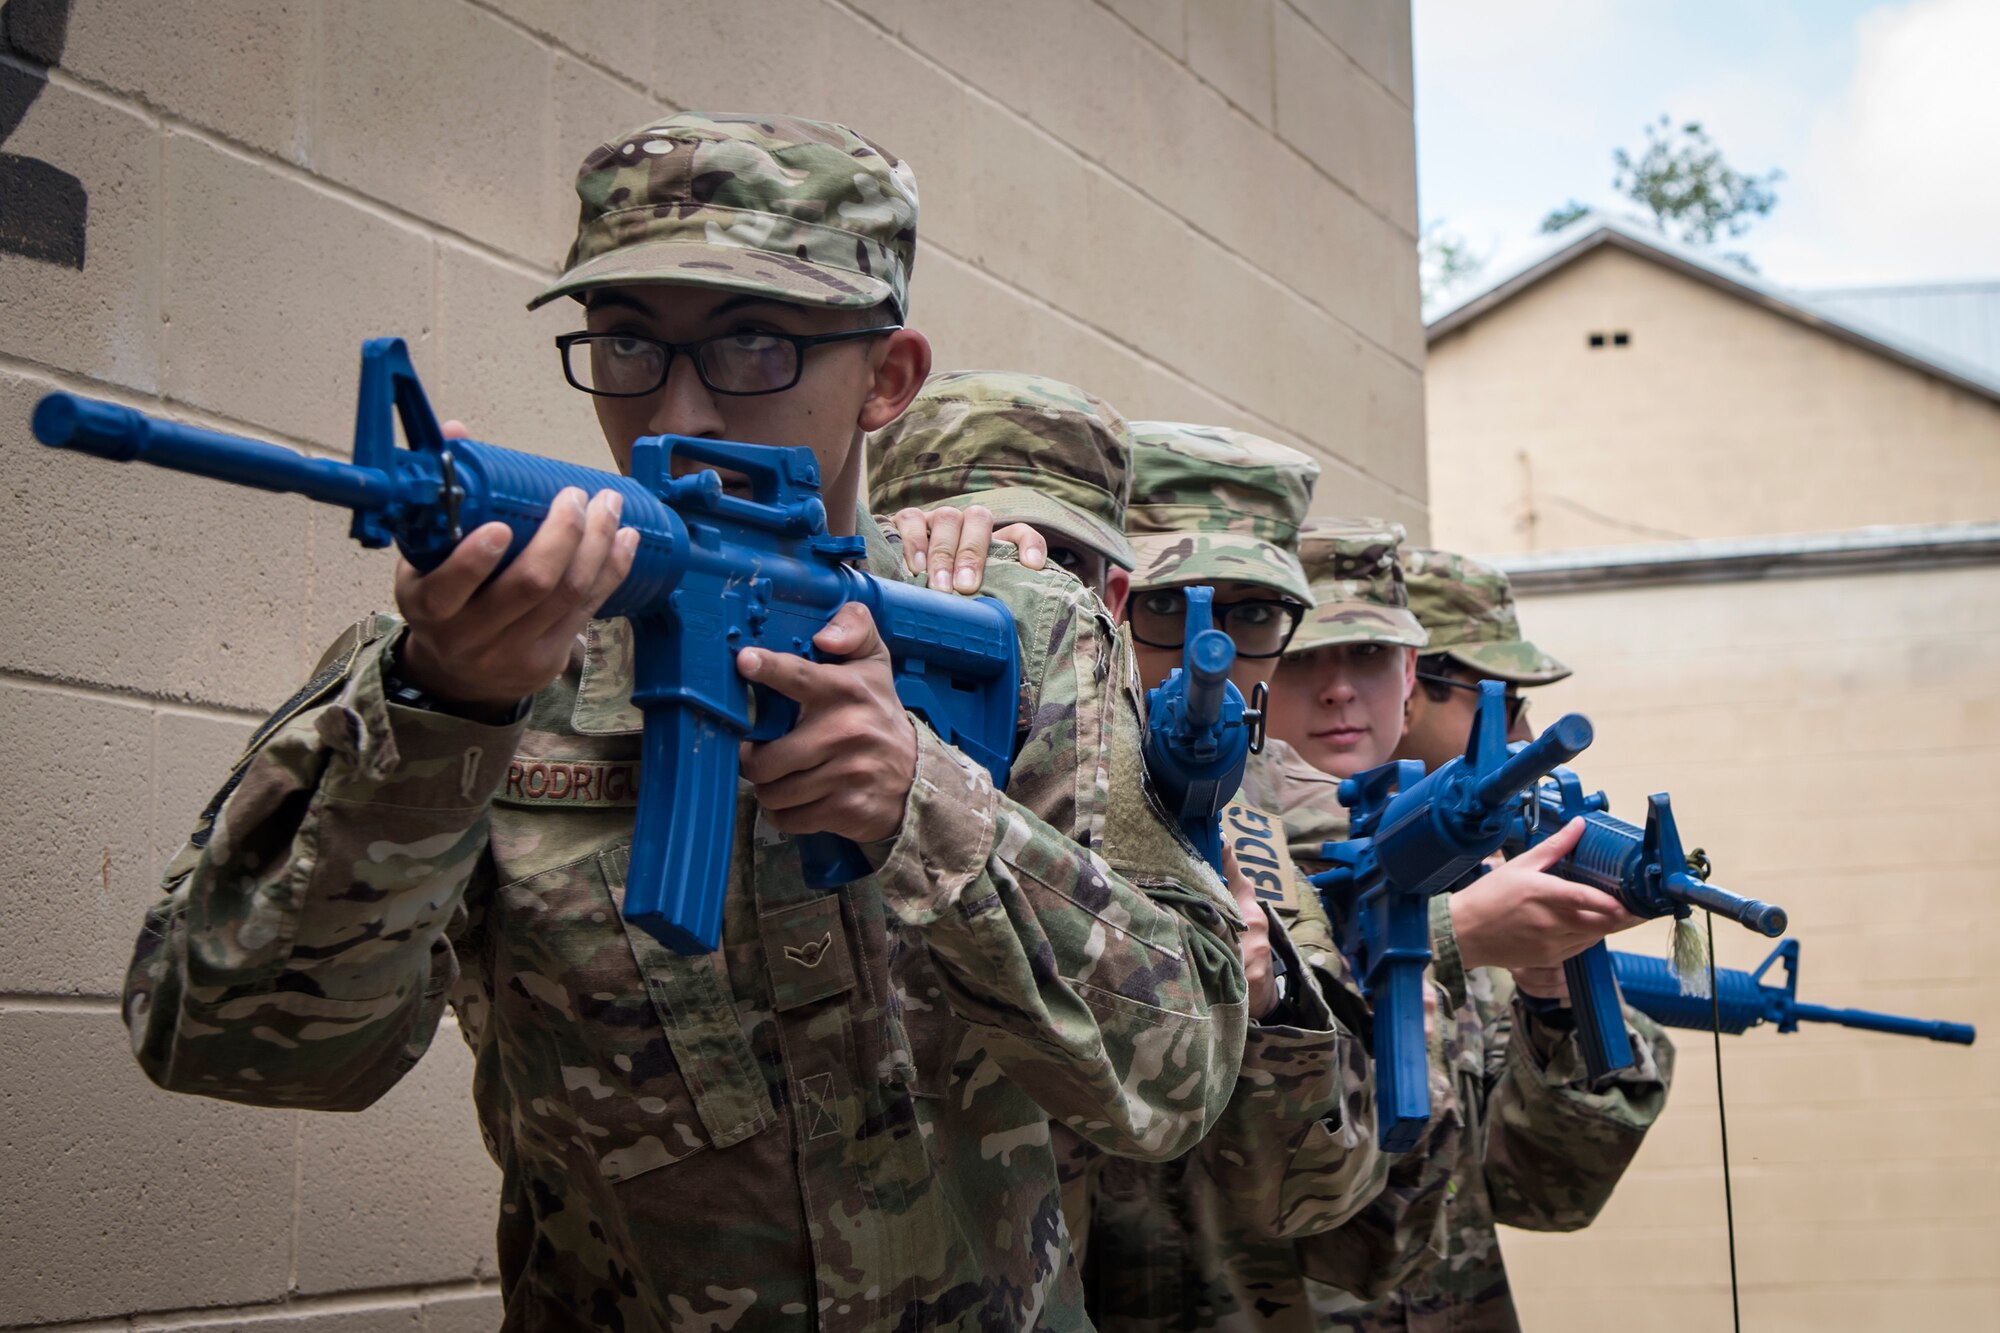 Airmen from the 820th Base Defense Group (BDG), prepare to advance their position during dismounted operations training, March 27, 2018, at Moody Air Force Base, Ga.  The dismounted ops training is part of an Initial Qualification Training, which gives new Airmen coming into the BDG an opportunity to learn a baseline of basic combat skills that will be needed to successfully operate within a cohesive unit while in a deployed environment. (U.S. Air Force photo by Airman Eugene Oliver)